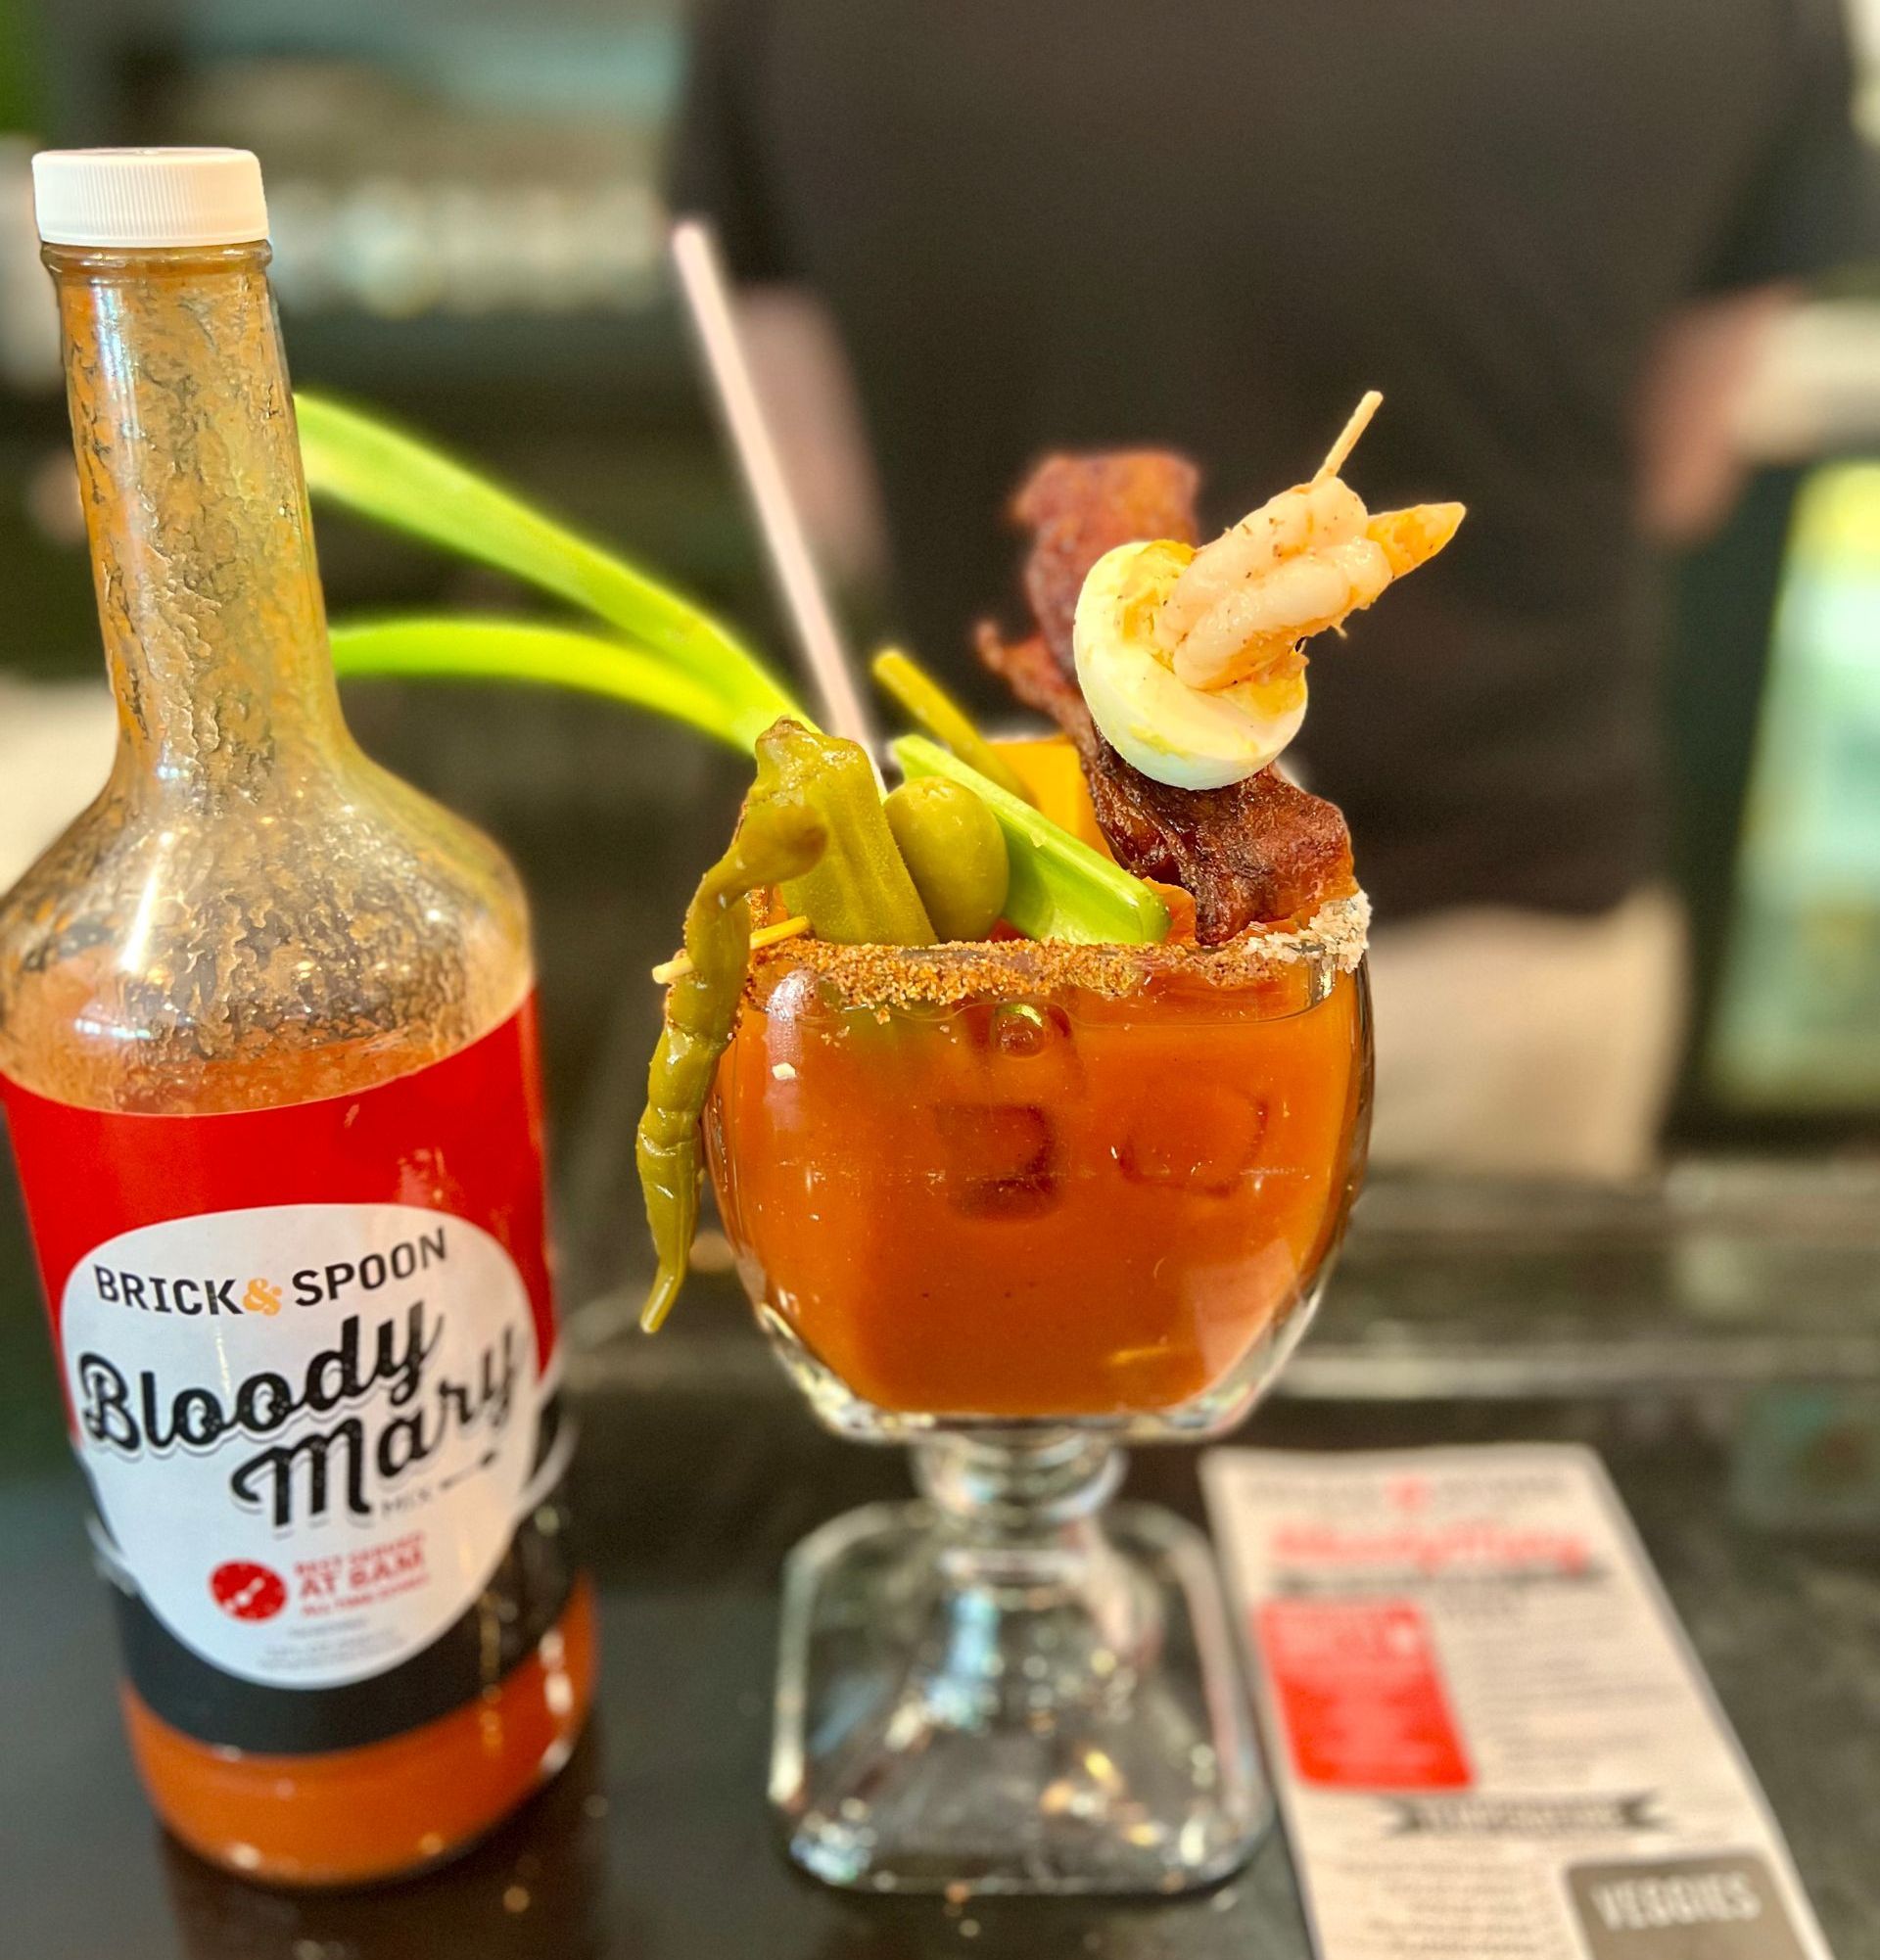 Brick and Spoon Serves Up Consistency, Cajun Flair, and Iconic Bloody Mary's in Orange Beach